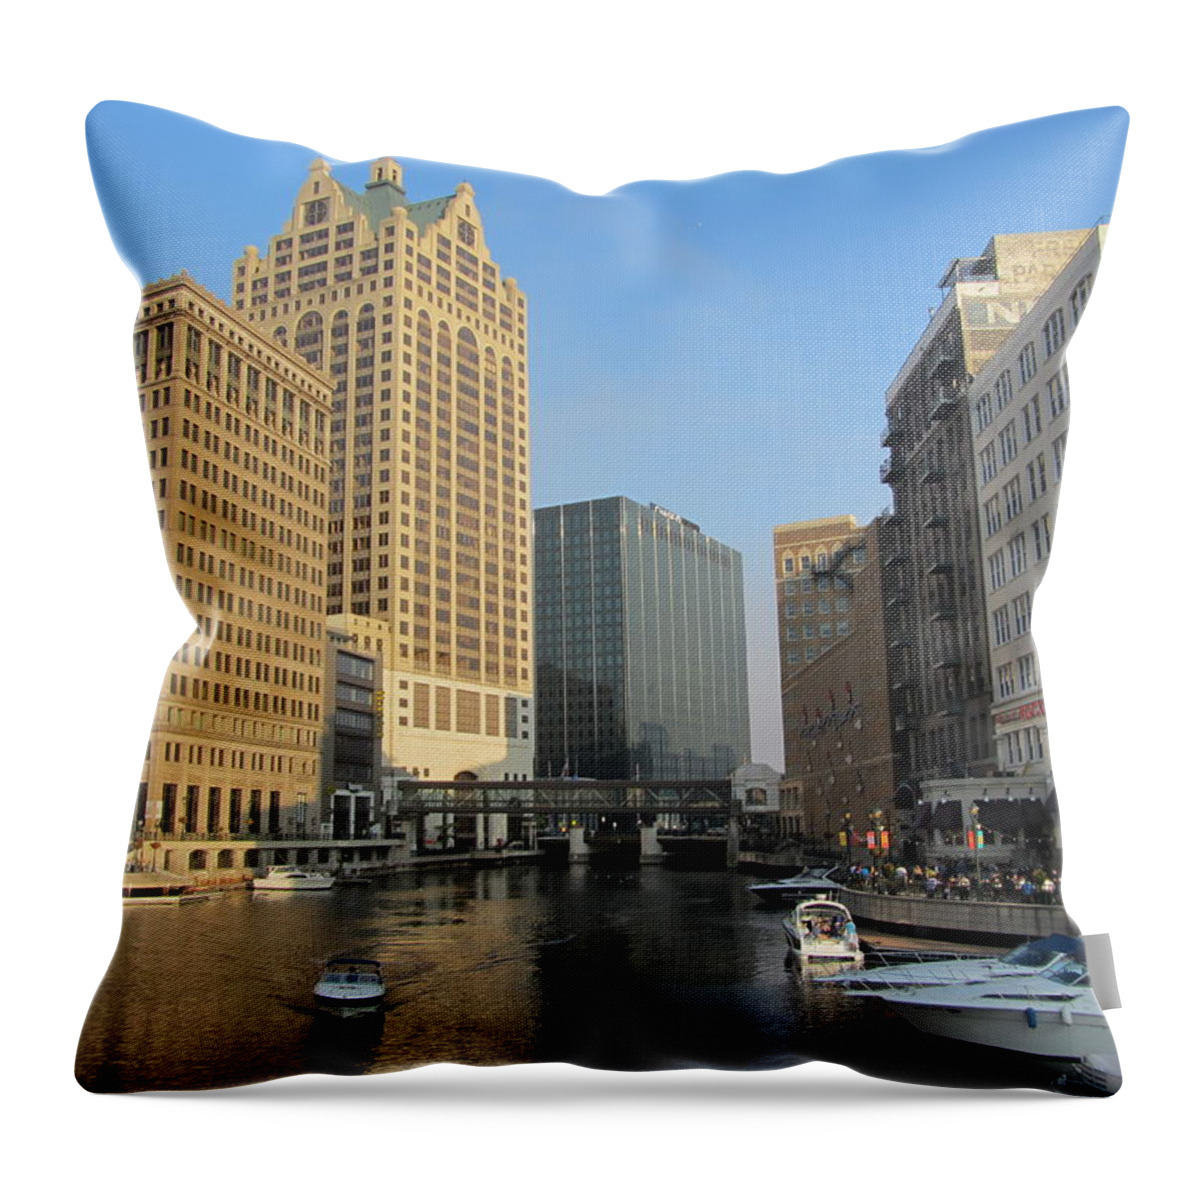 Milwaukee Throw Pillow featuring the photograph Milwaukee River Theater District 2 by Anita Burgermeister